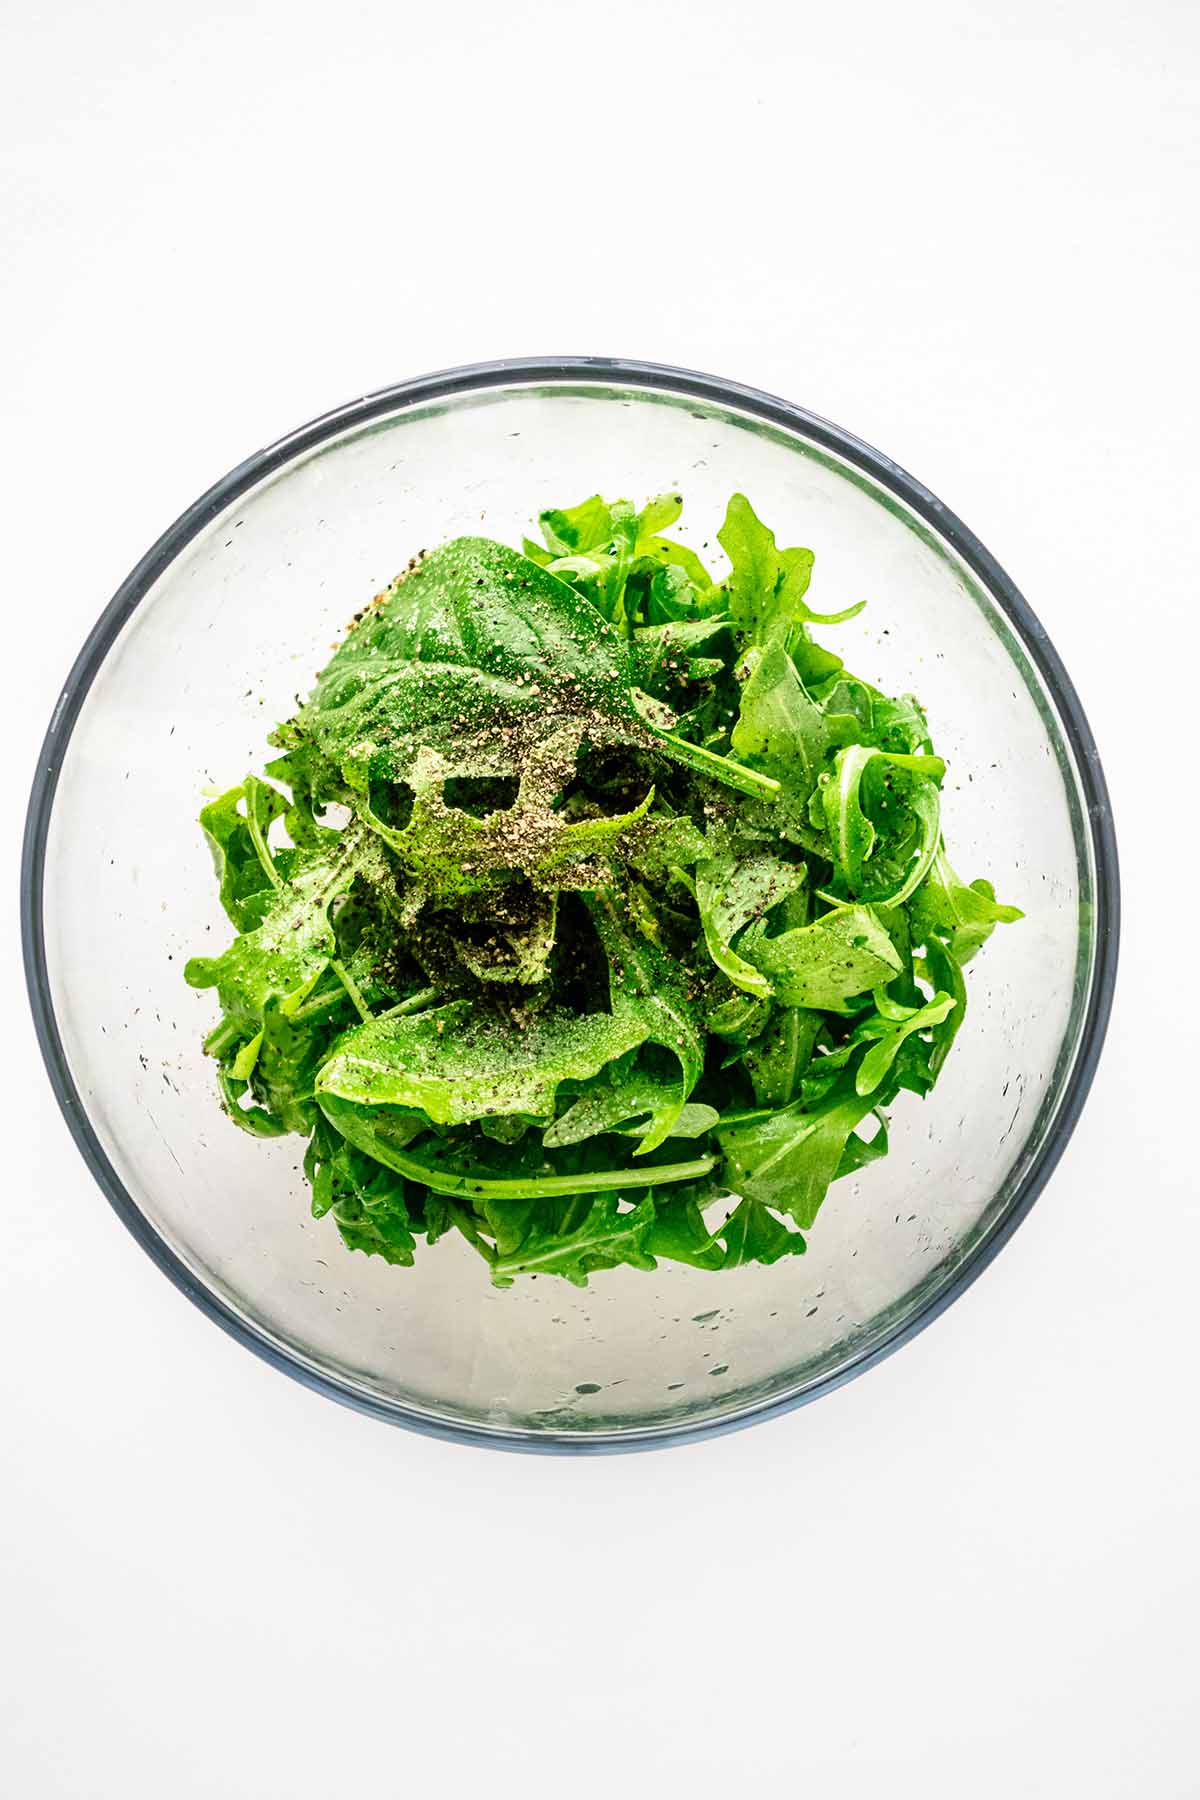 Overhead view of arugula, oil, salt, and pepper in a small glass bowl.